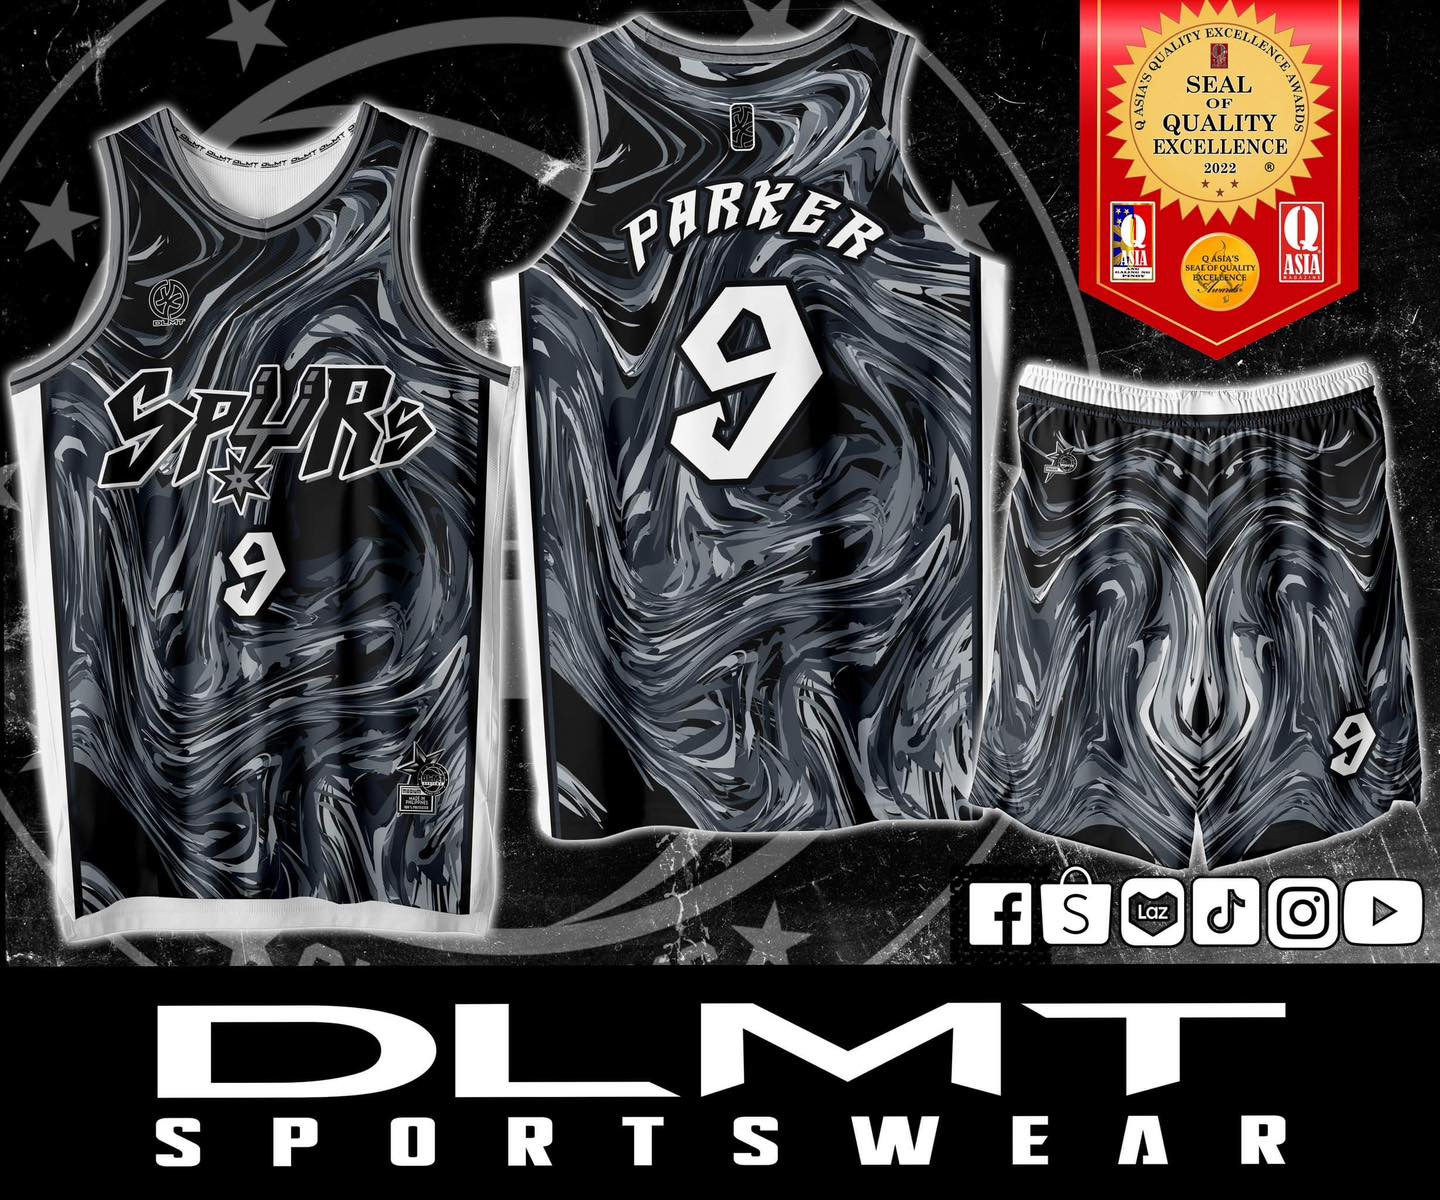 DlMT Sublimation Jersey Customize team name Surname Jersey # Click the